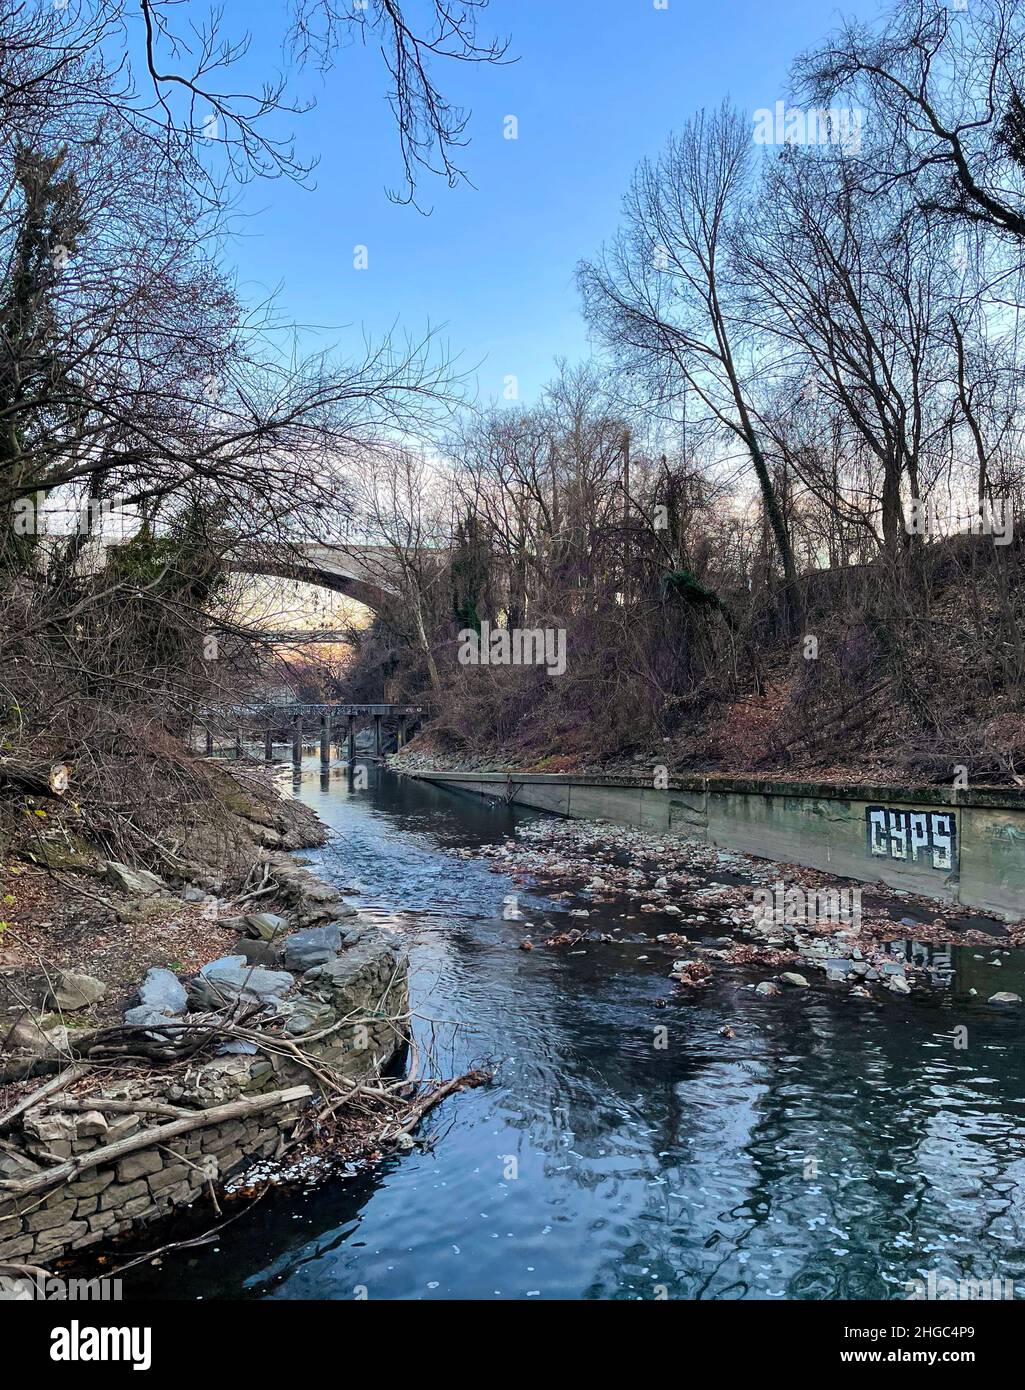 Brown leaves, bare trees, and grafitti surround the stone and wood walled Jones Falls late in the afternoon on a winter day in Baltimore, Maryland. Stock Photo